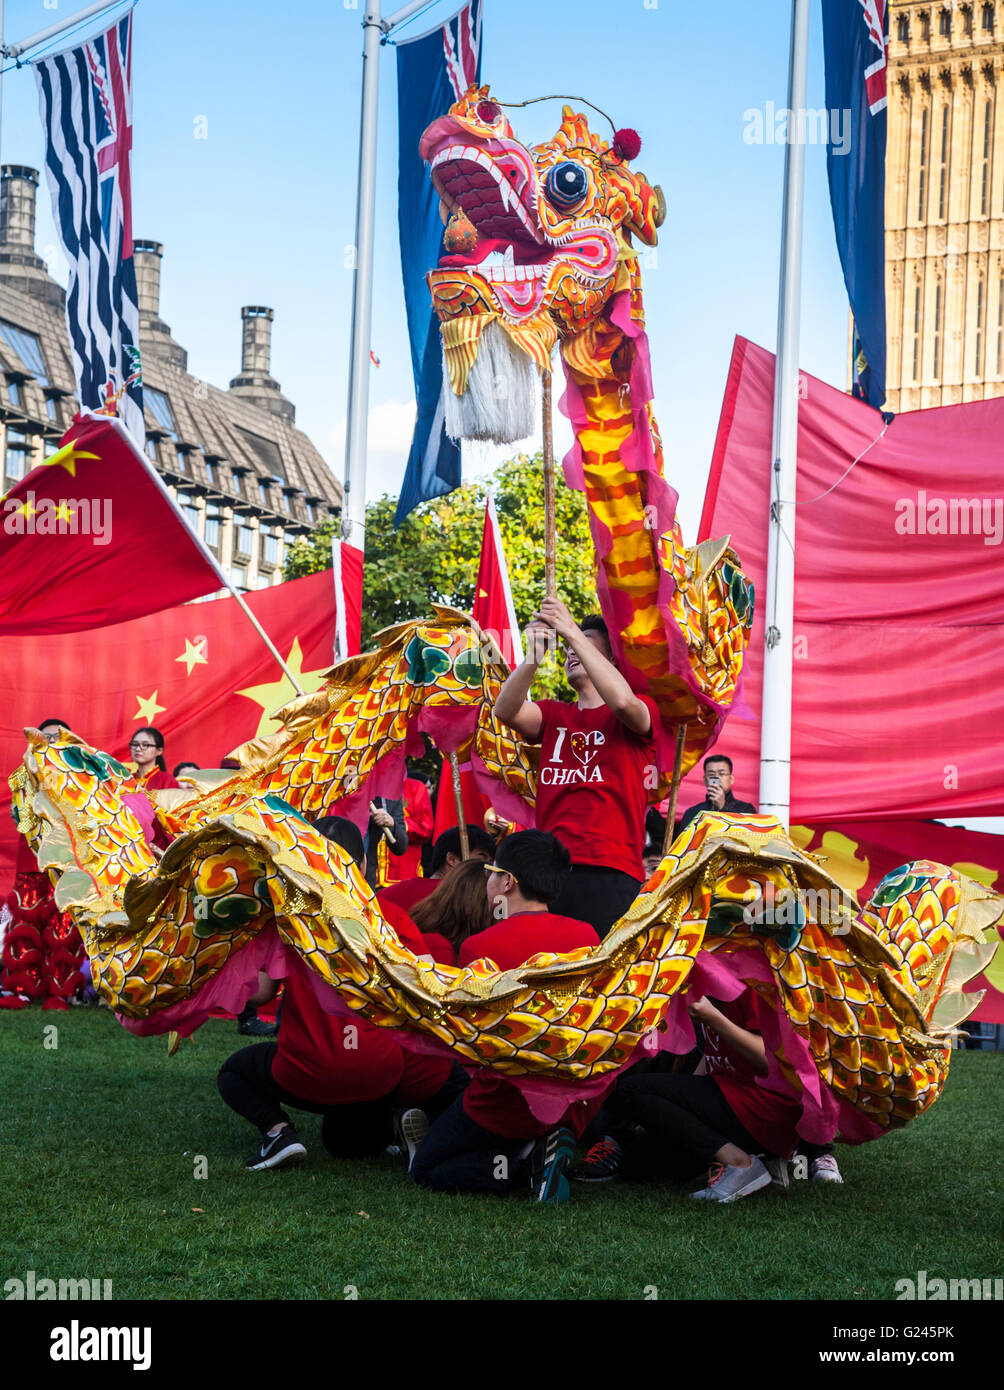 Chinese Dragon Dance performed by supporters of President Xi Jinping on his visit to Britain, Parliament Square, Westminster, Lo Stock Photo